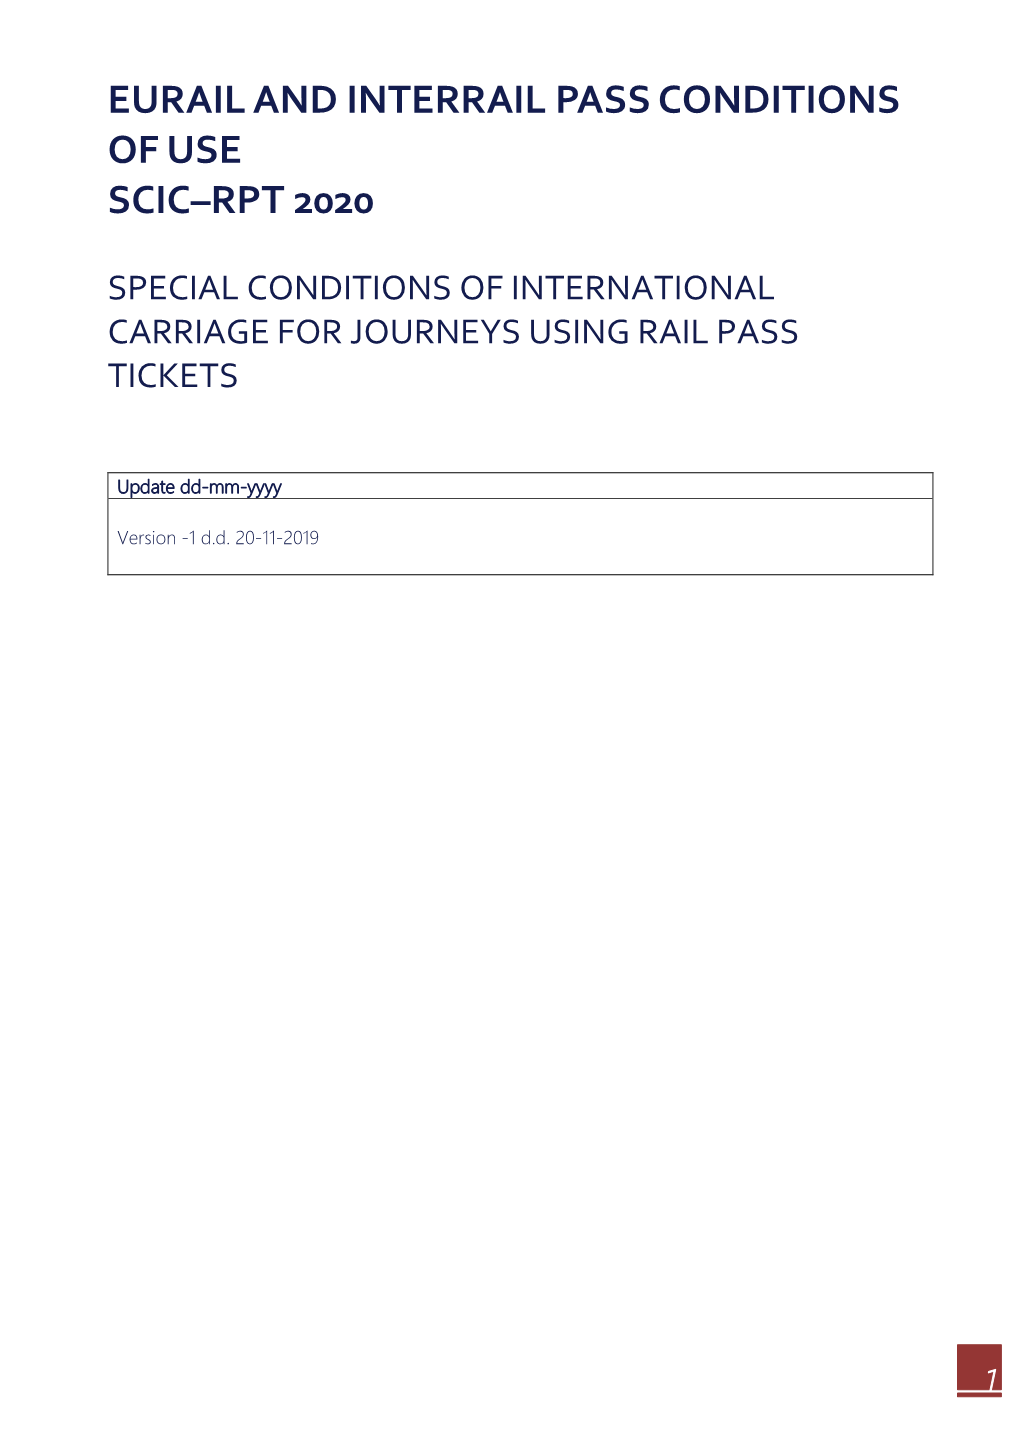 Eurail and Interrail Pass Conditions of Use Scic–Rpt 2020